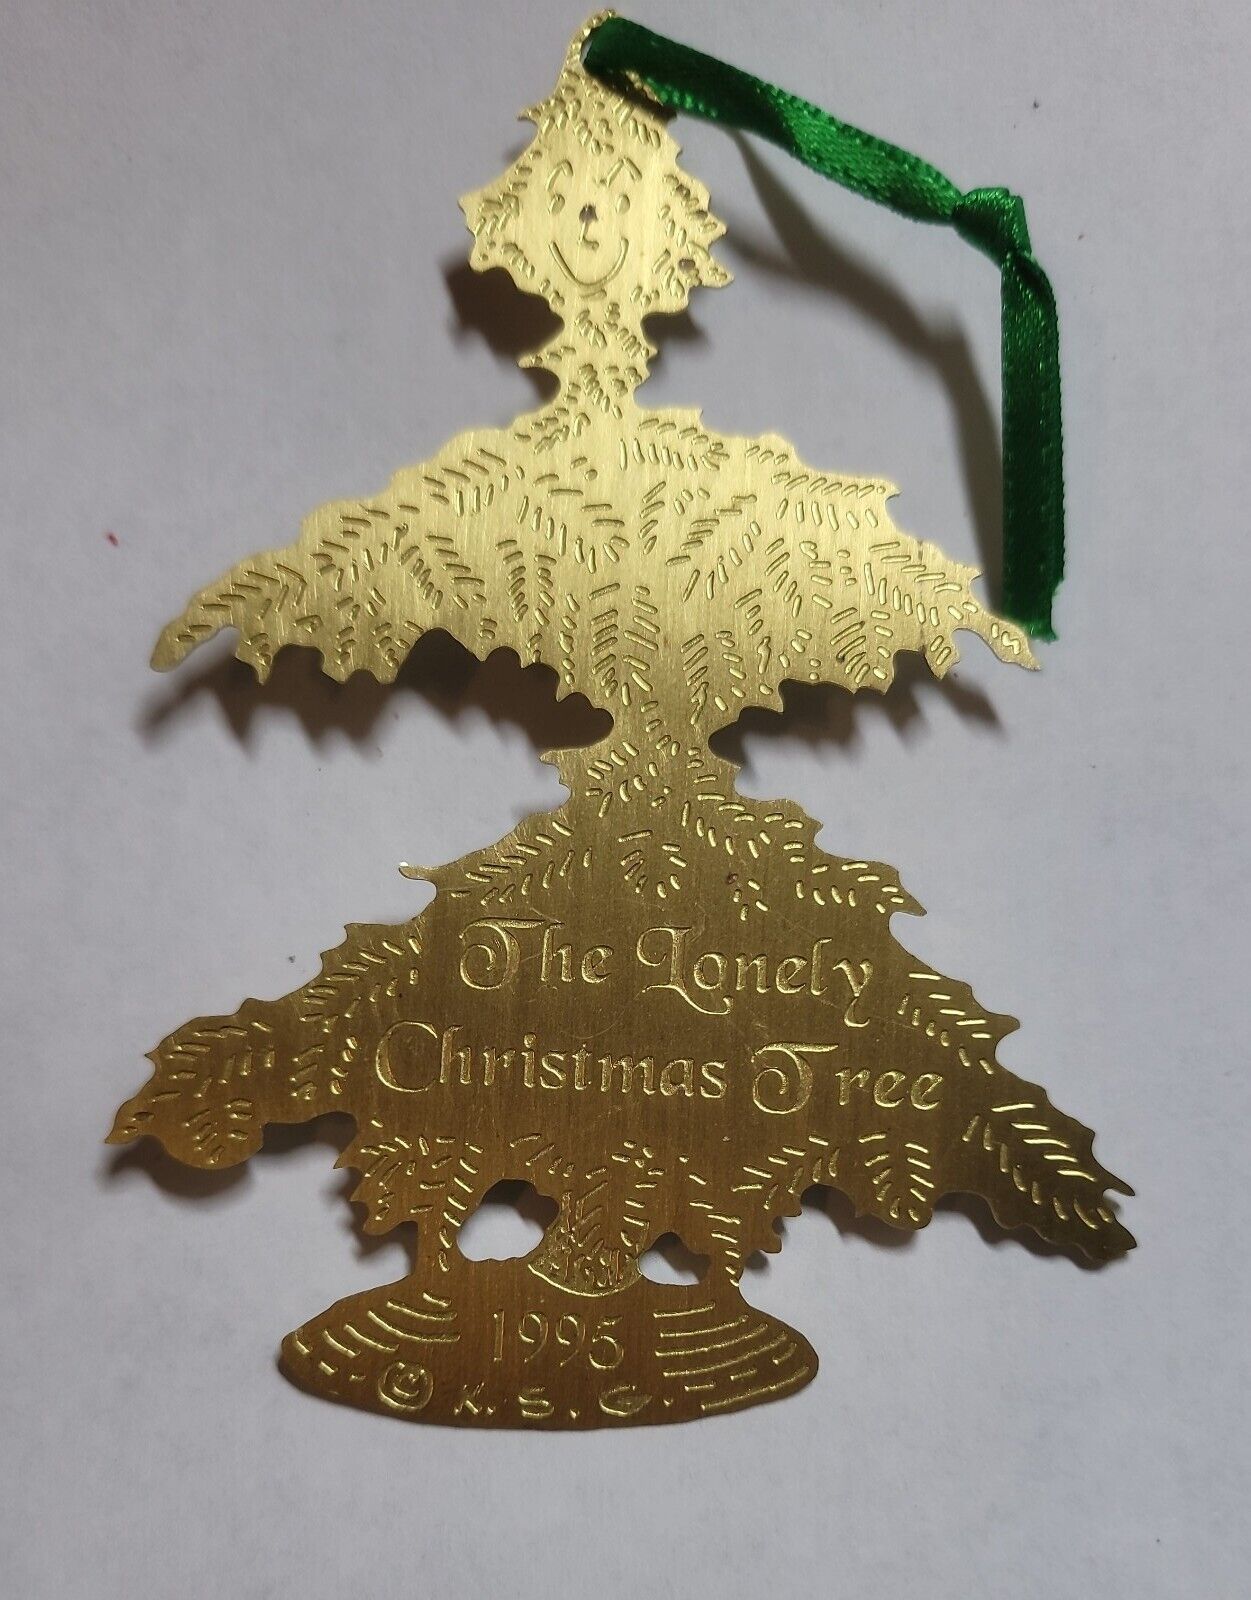 Vintage The Lonely Christmas Tree Brass Ornament 1995 KSG Bruce 